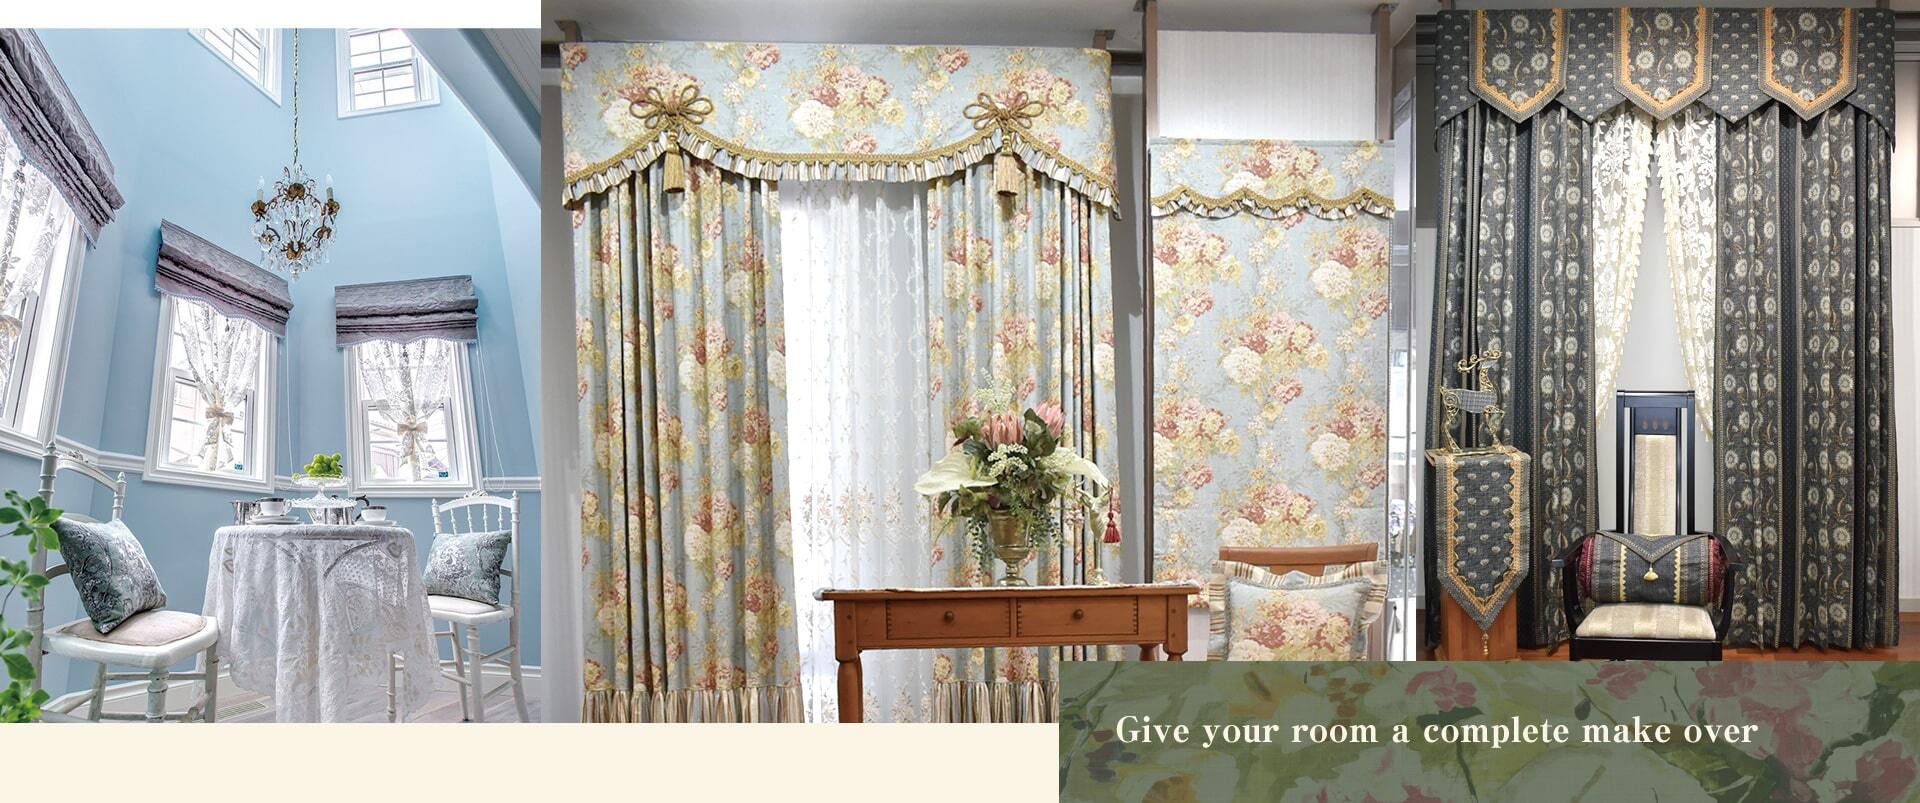 Give your room a complete make over